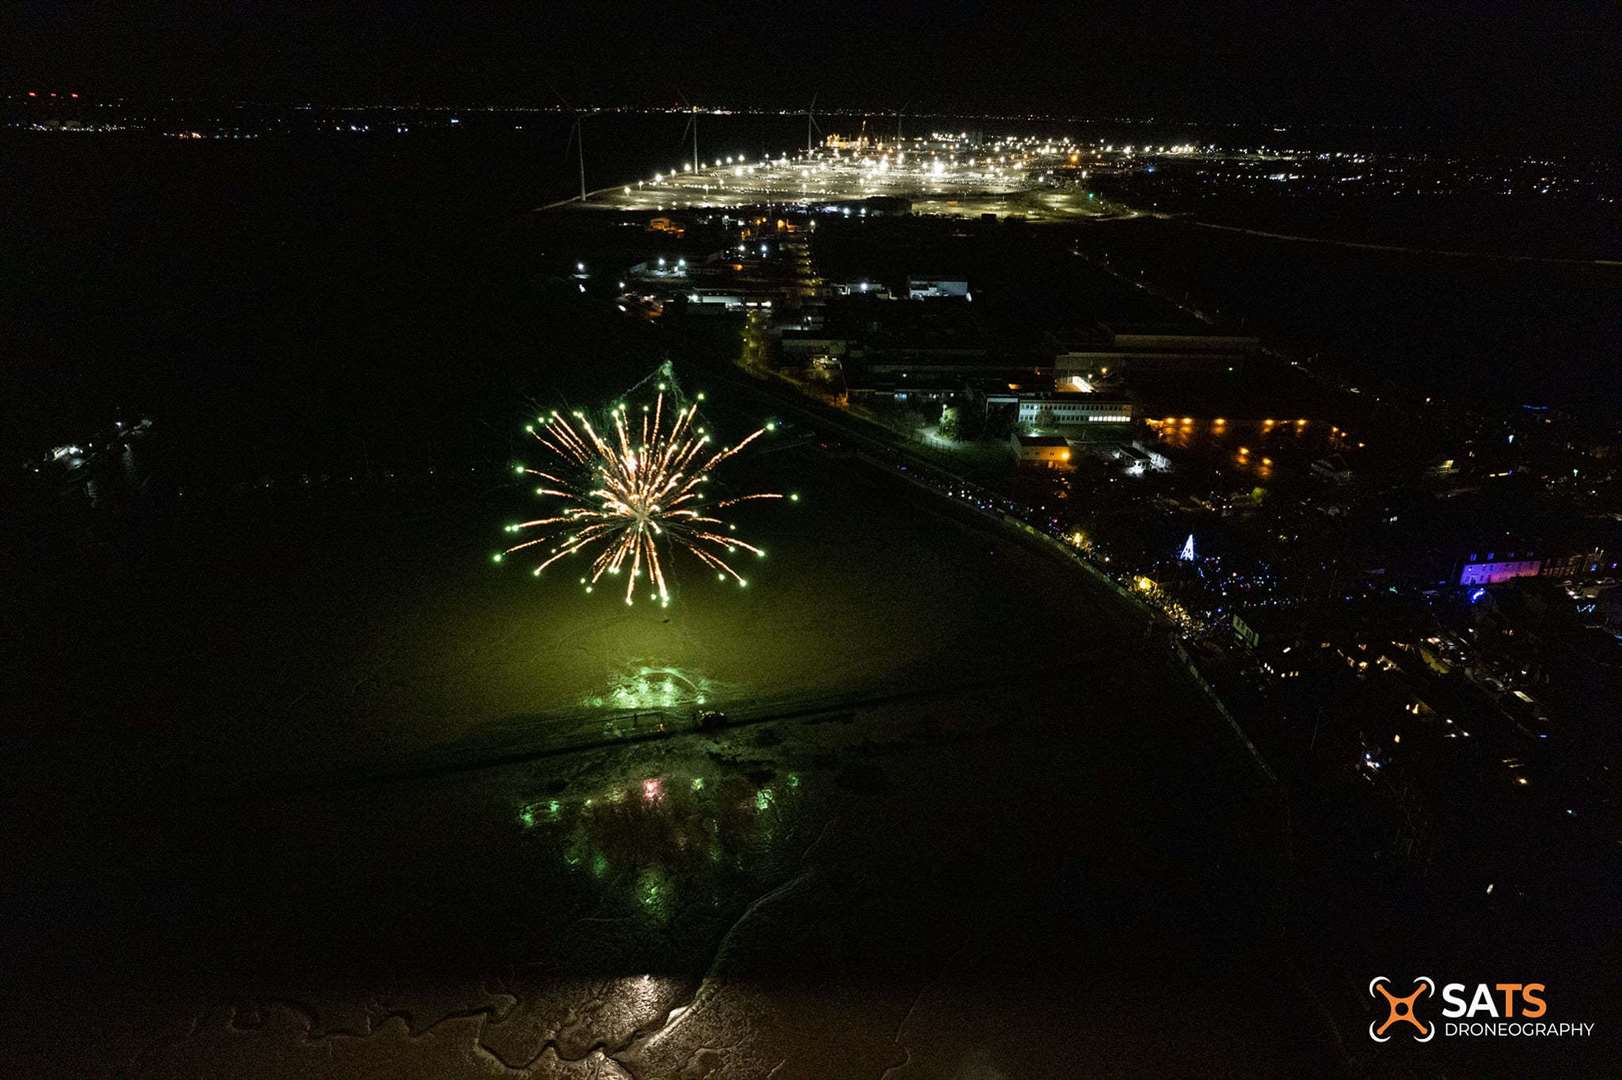 Fireworks over The Swale mark the finale of the Queenborough lantern parade. Picture: SATS Droneography